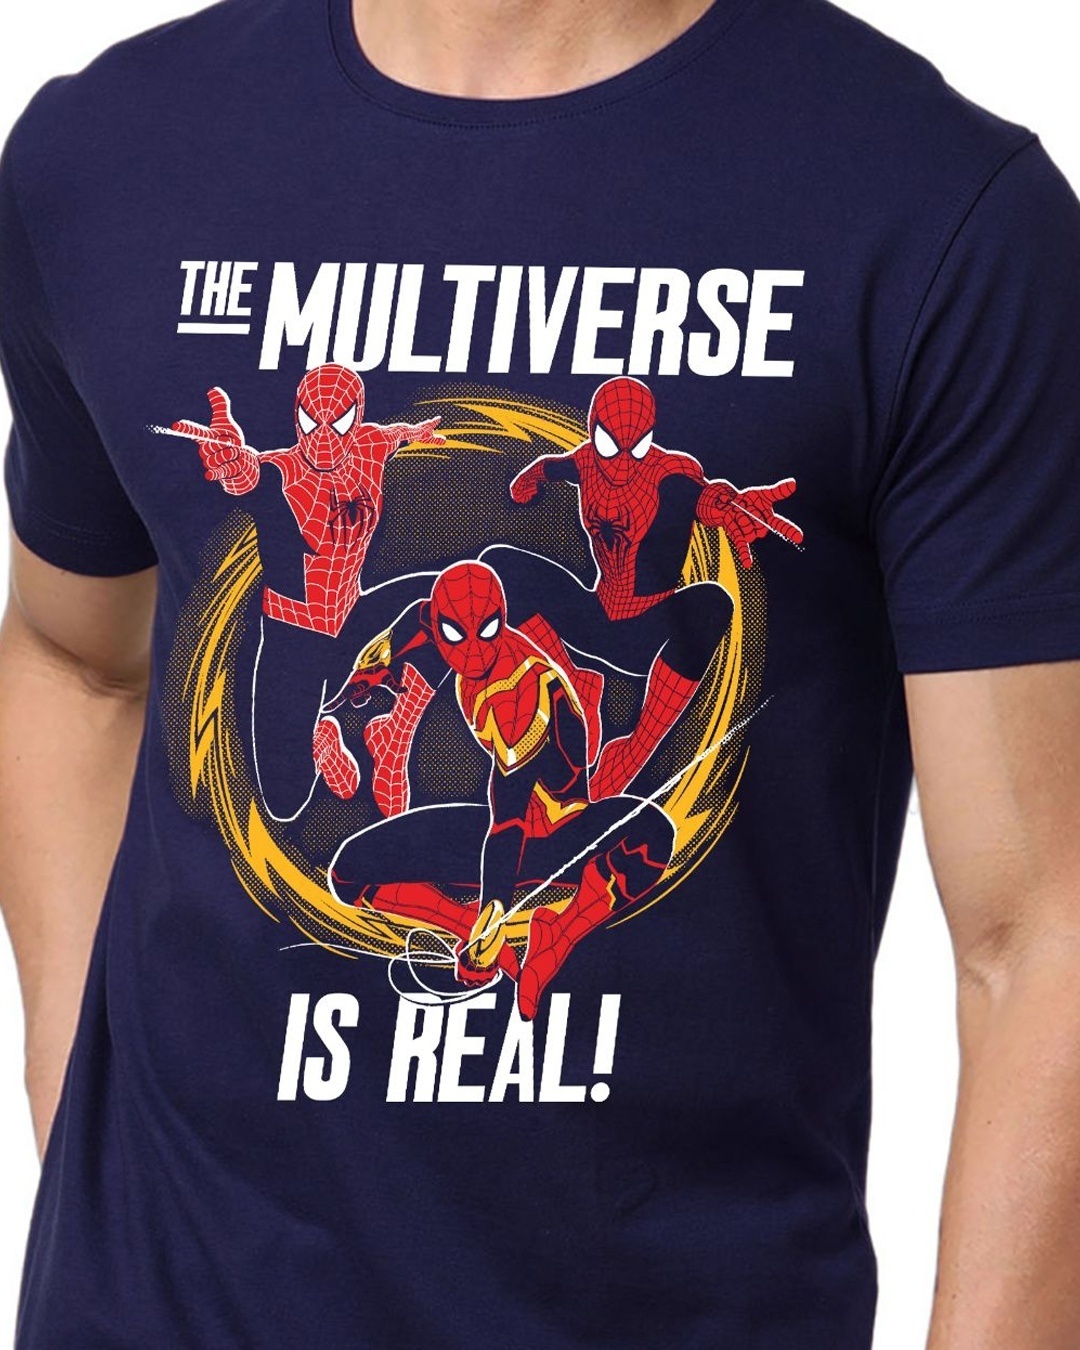 Shop Men's Blue Multiverse is Real Graphic Printed T-shirt